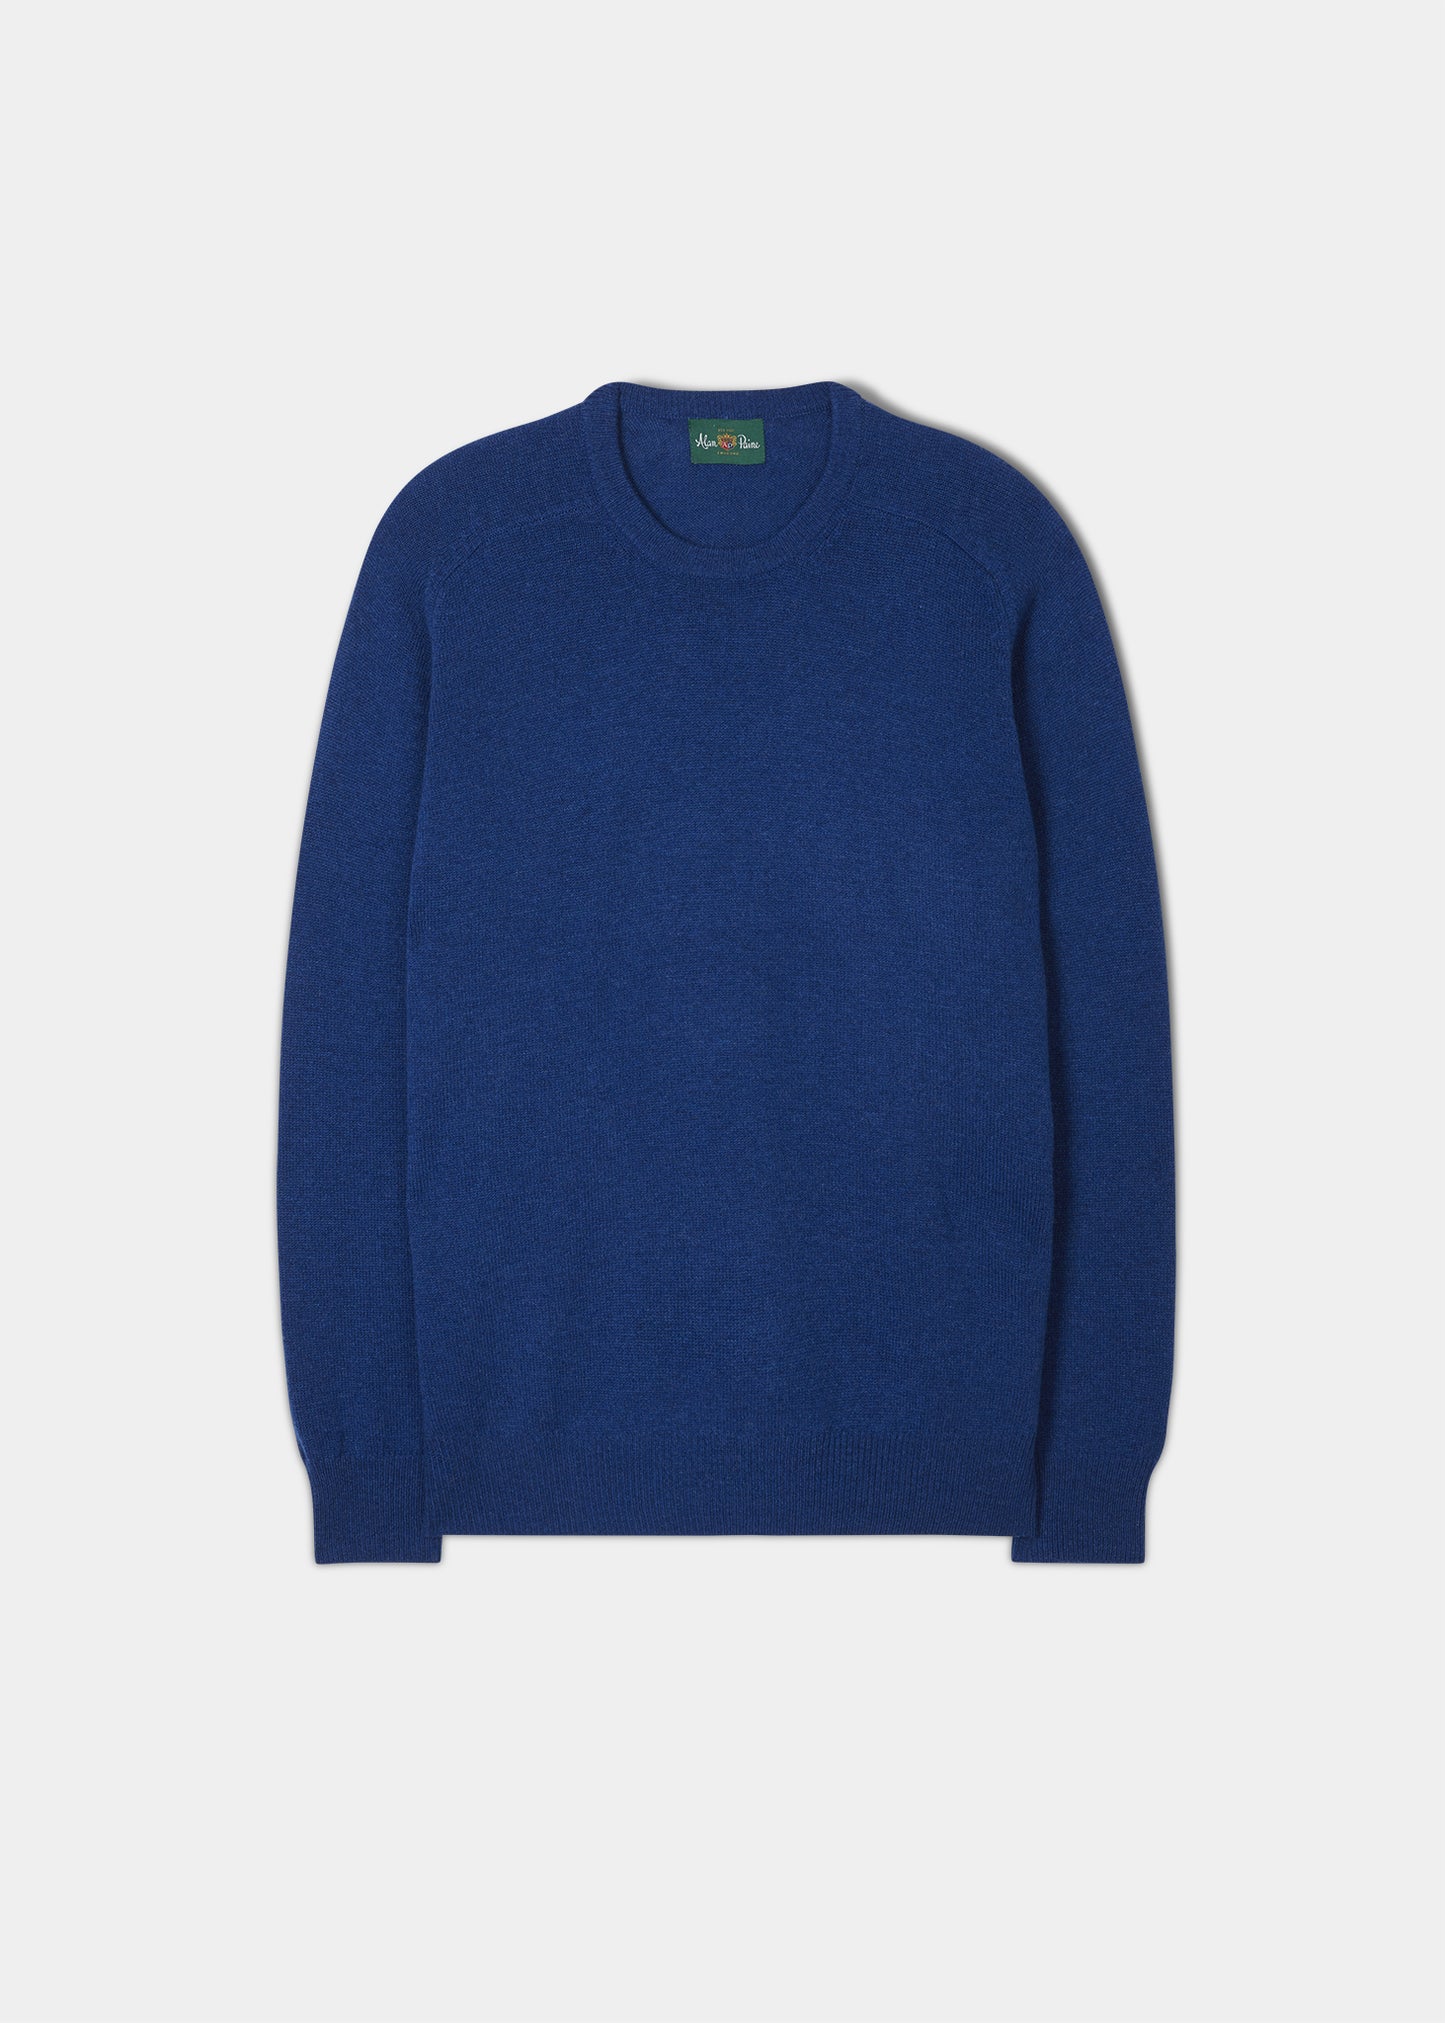 Men's Lambswool Crew Neck Jumper in Royal Blue - Classic Fit | Web ...